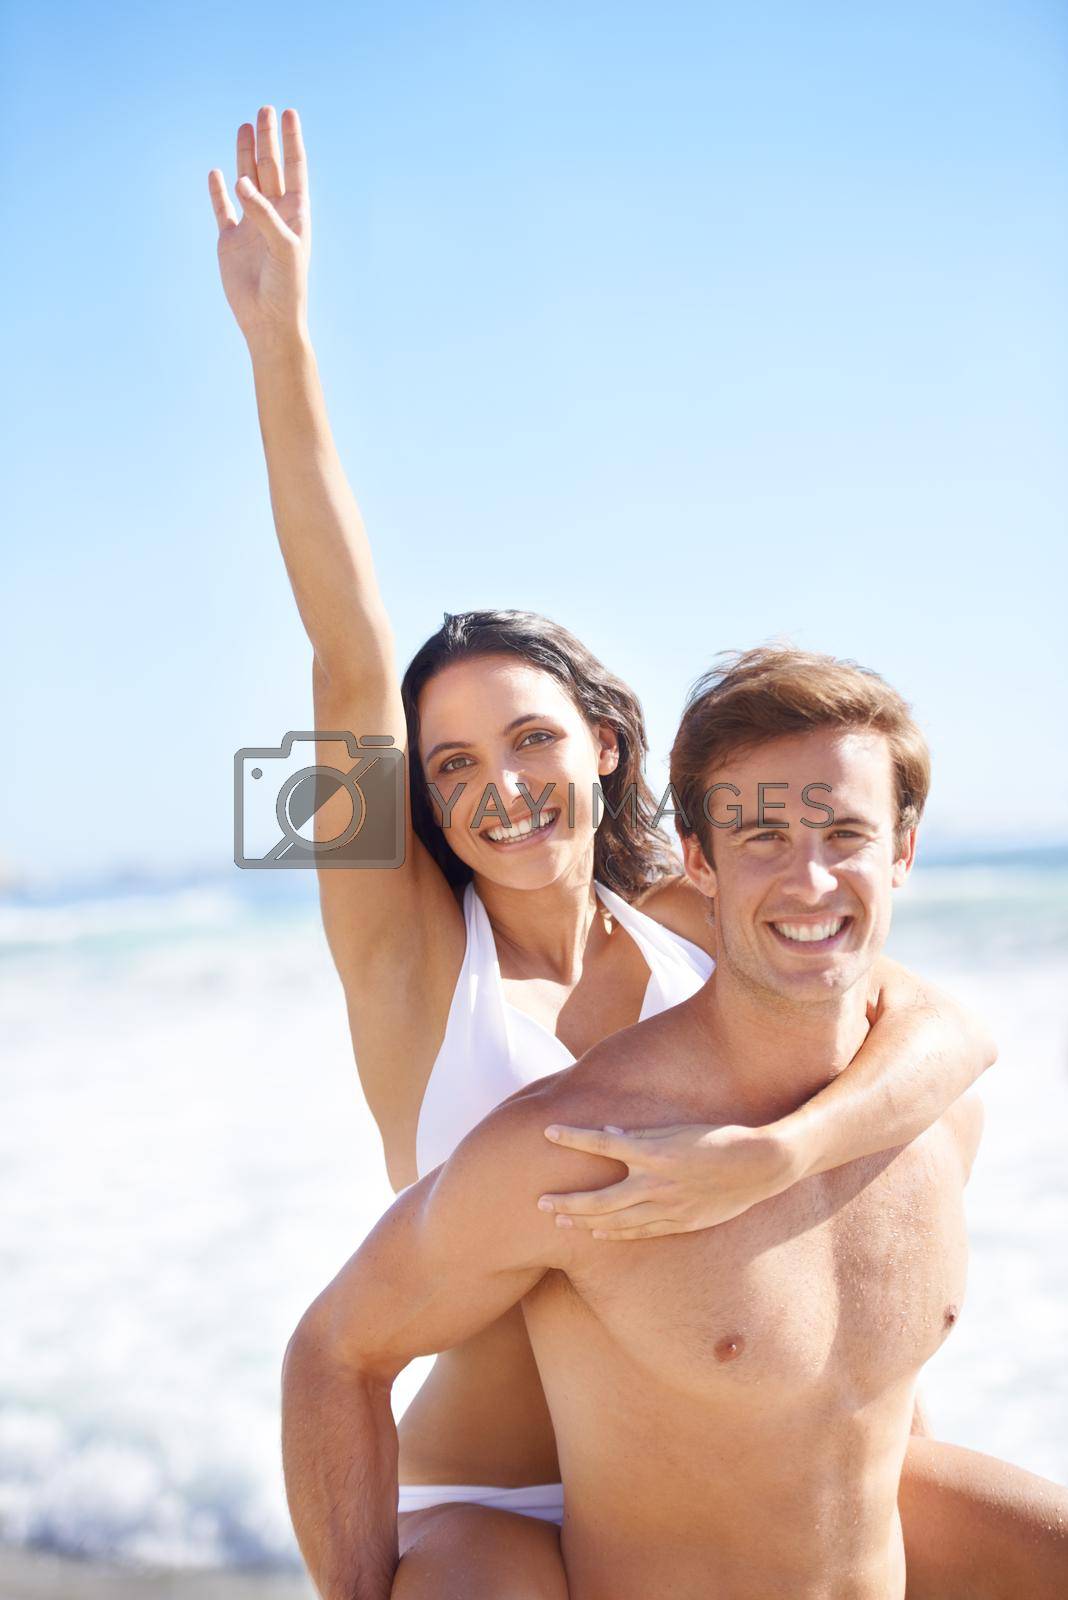 Romance and fun under the sun. A lovely young couple having fun on the beach in summer